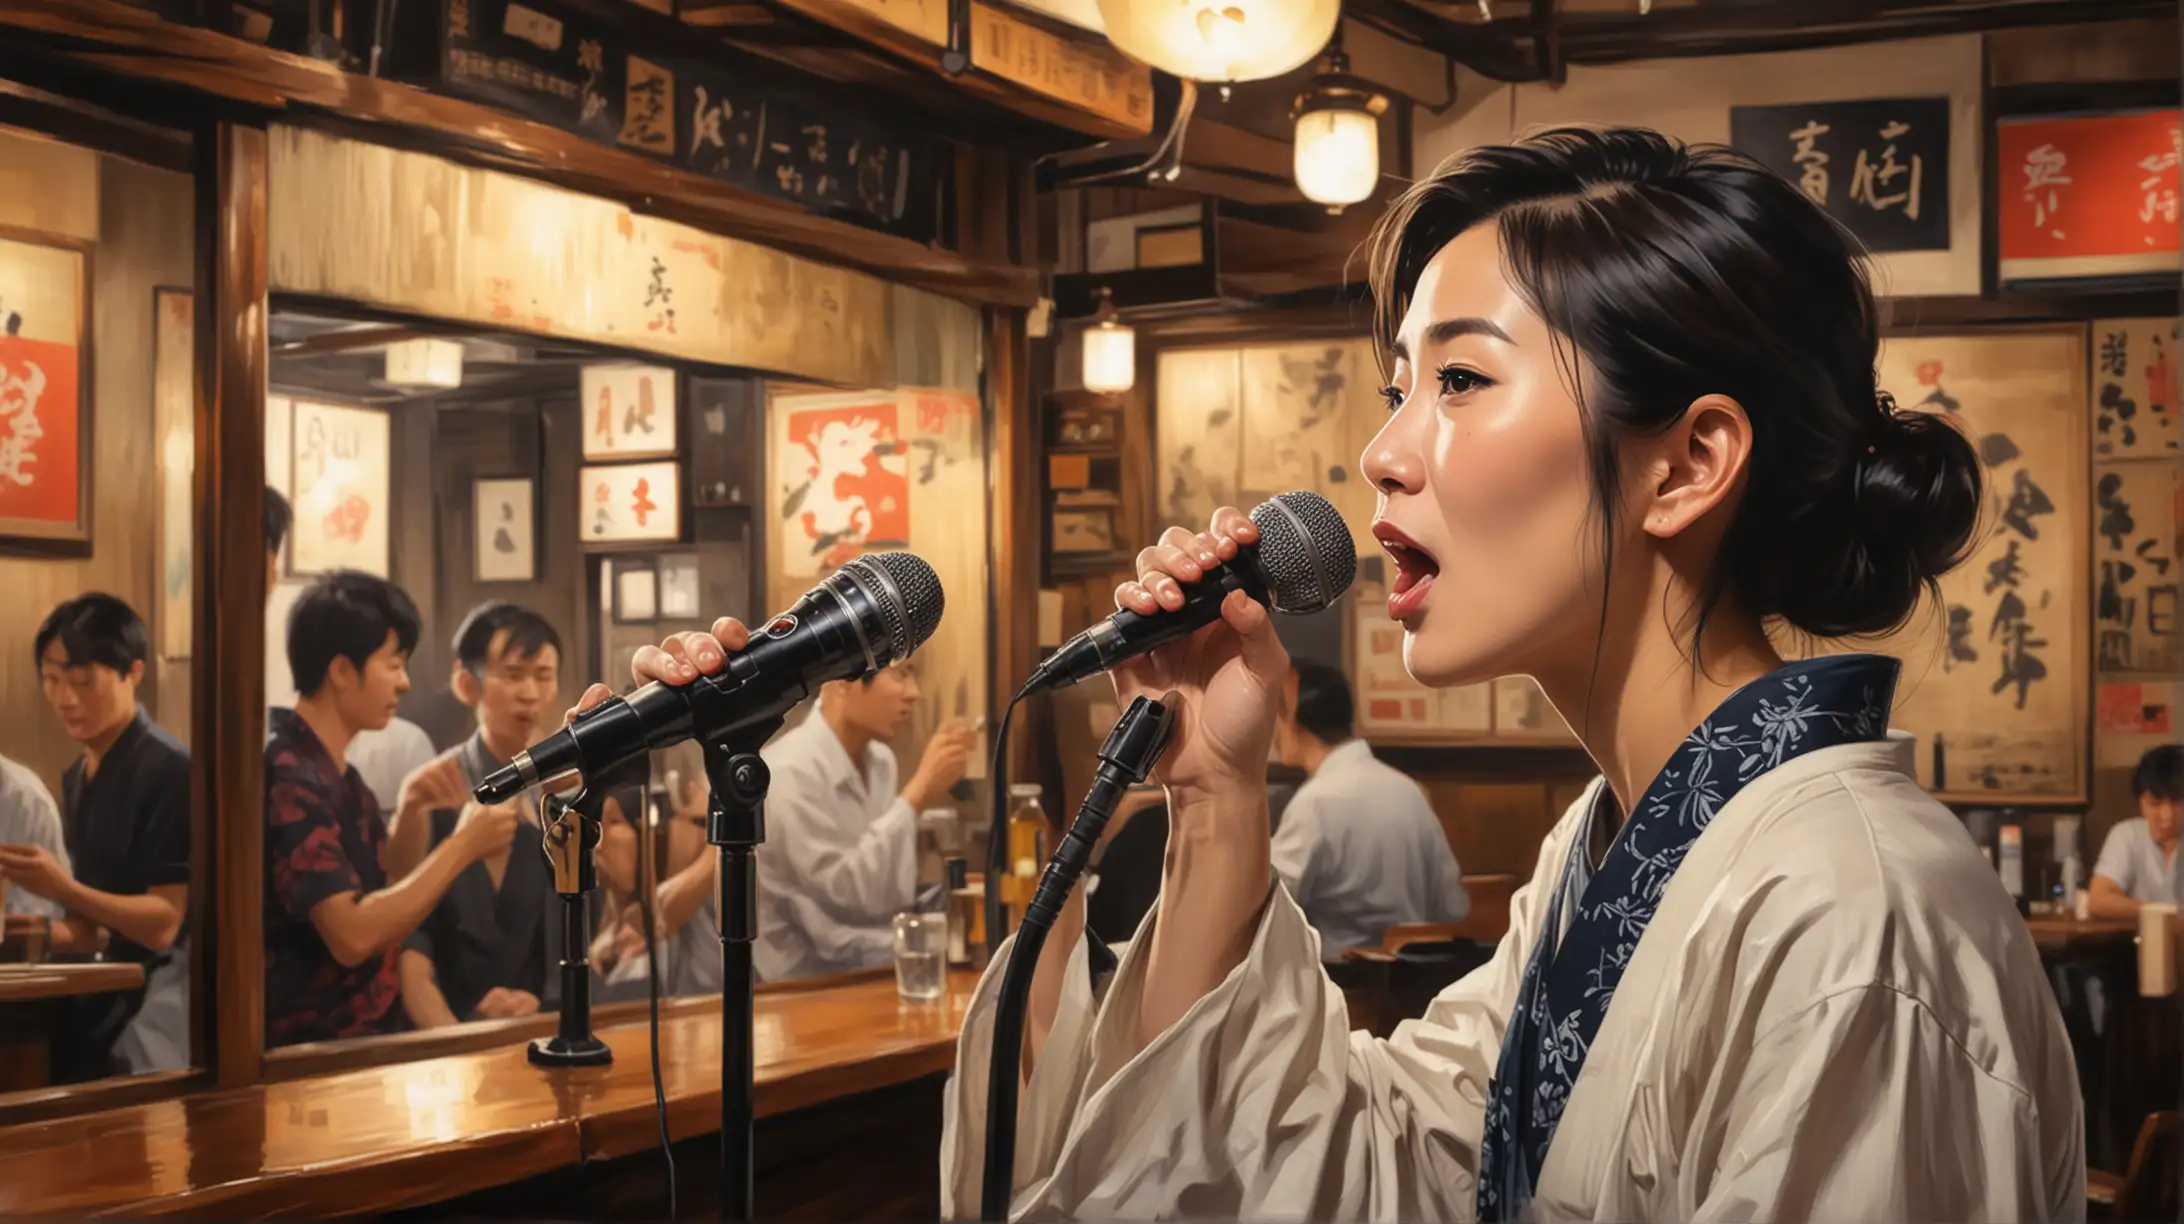 post-expressionist Japanese painting of a 35 year old woman, singing into a vintage microphone, in a packed izakaya bar, lonely but stylish concept with free brush technique, 